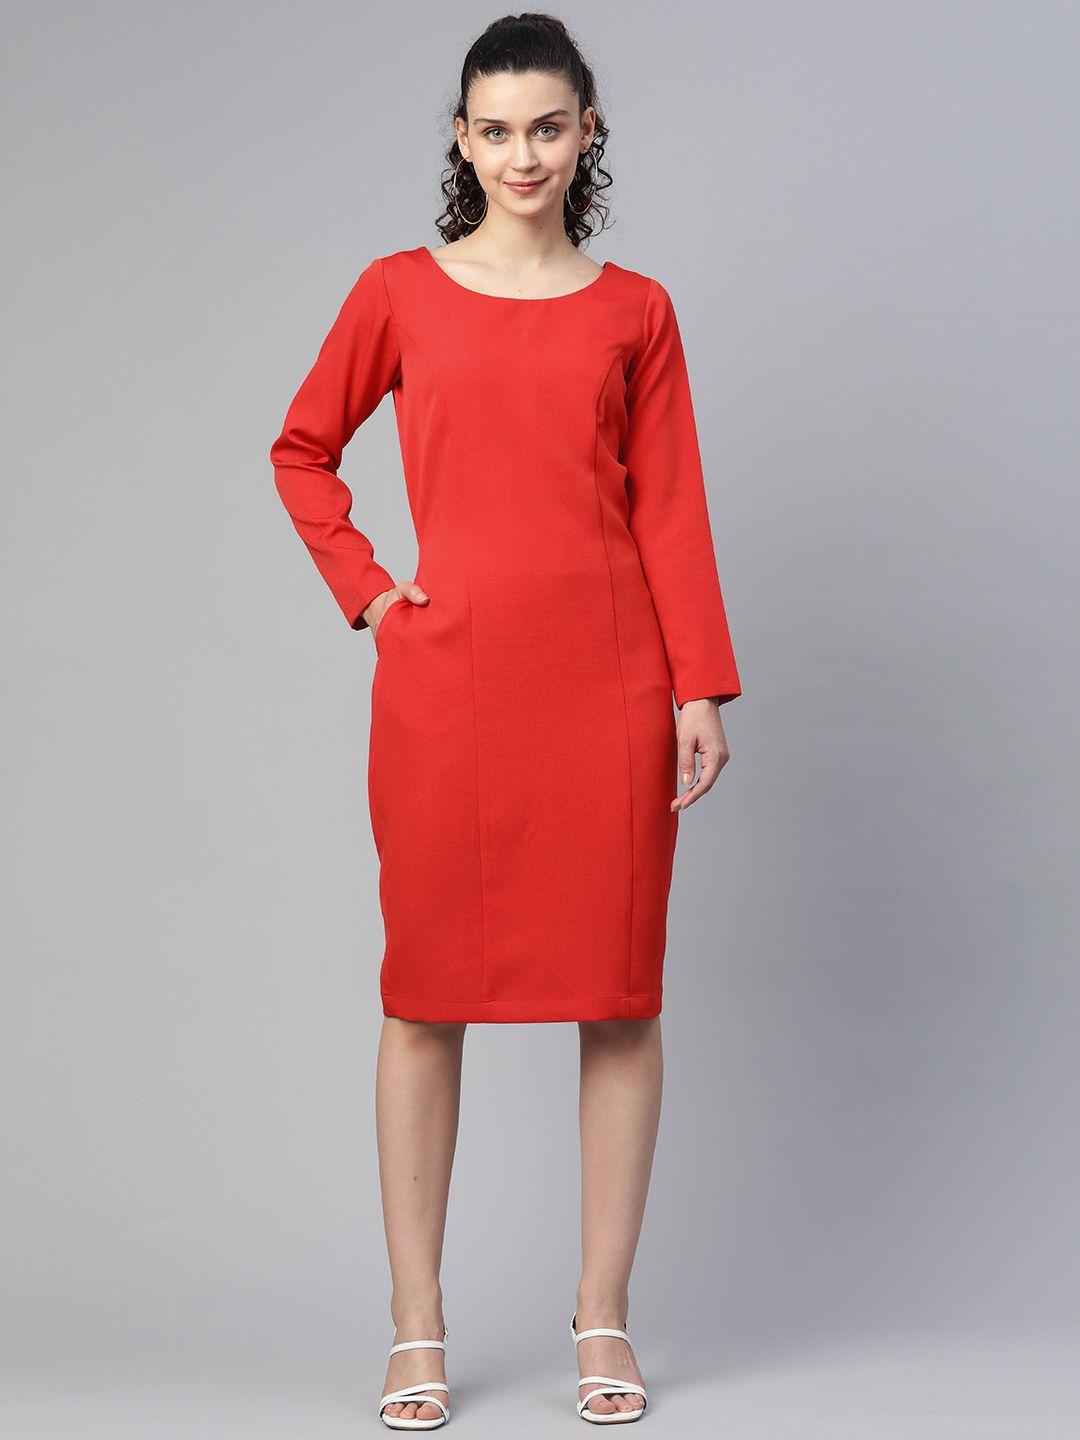 powersutra-red-solid-sheath-dress